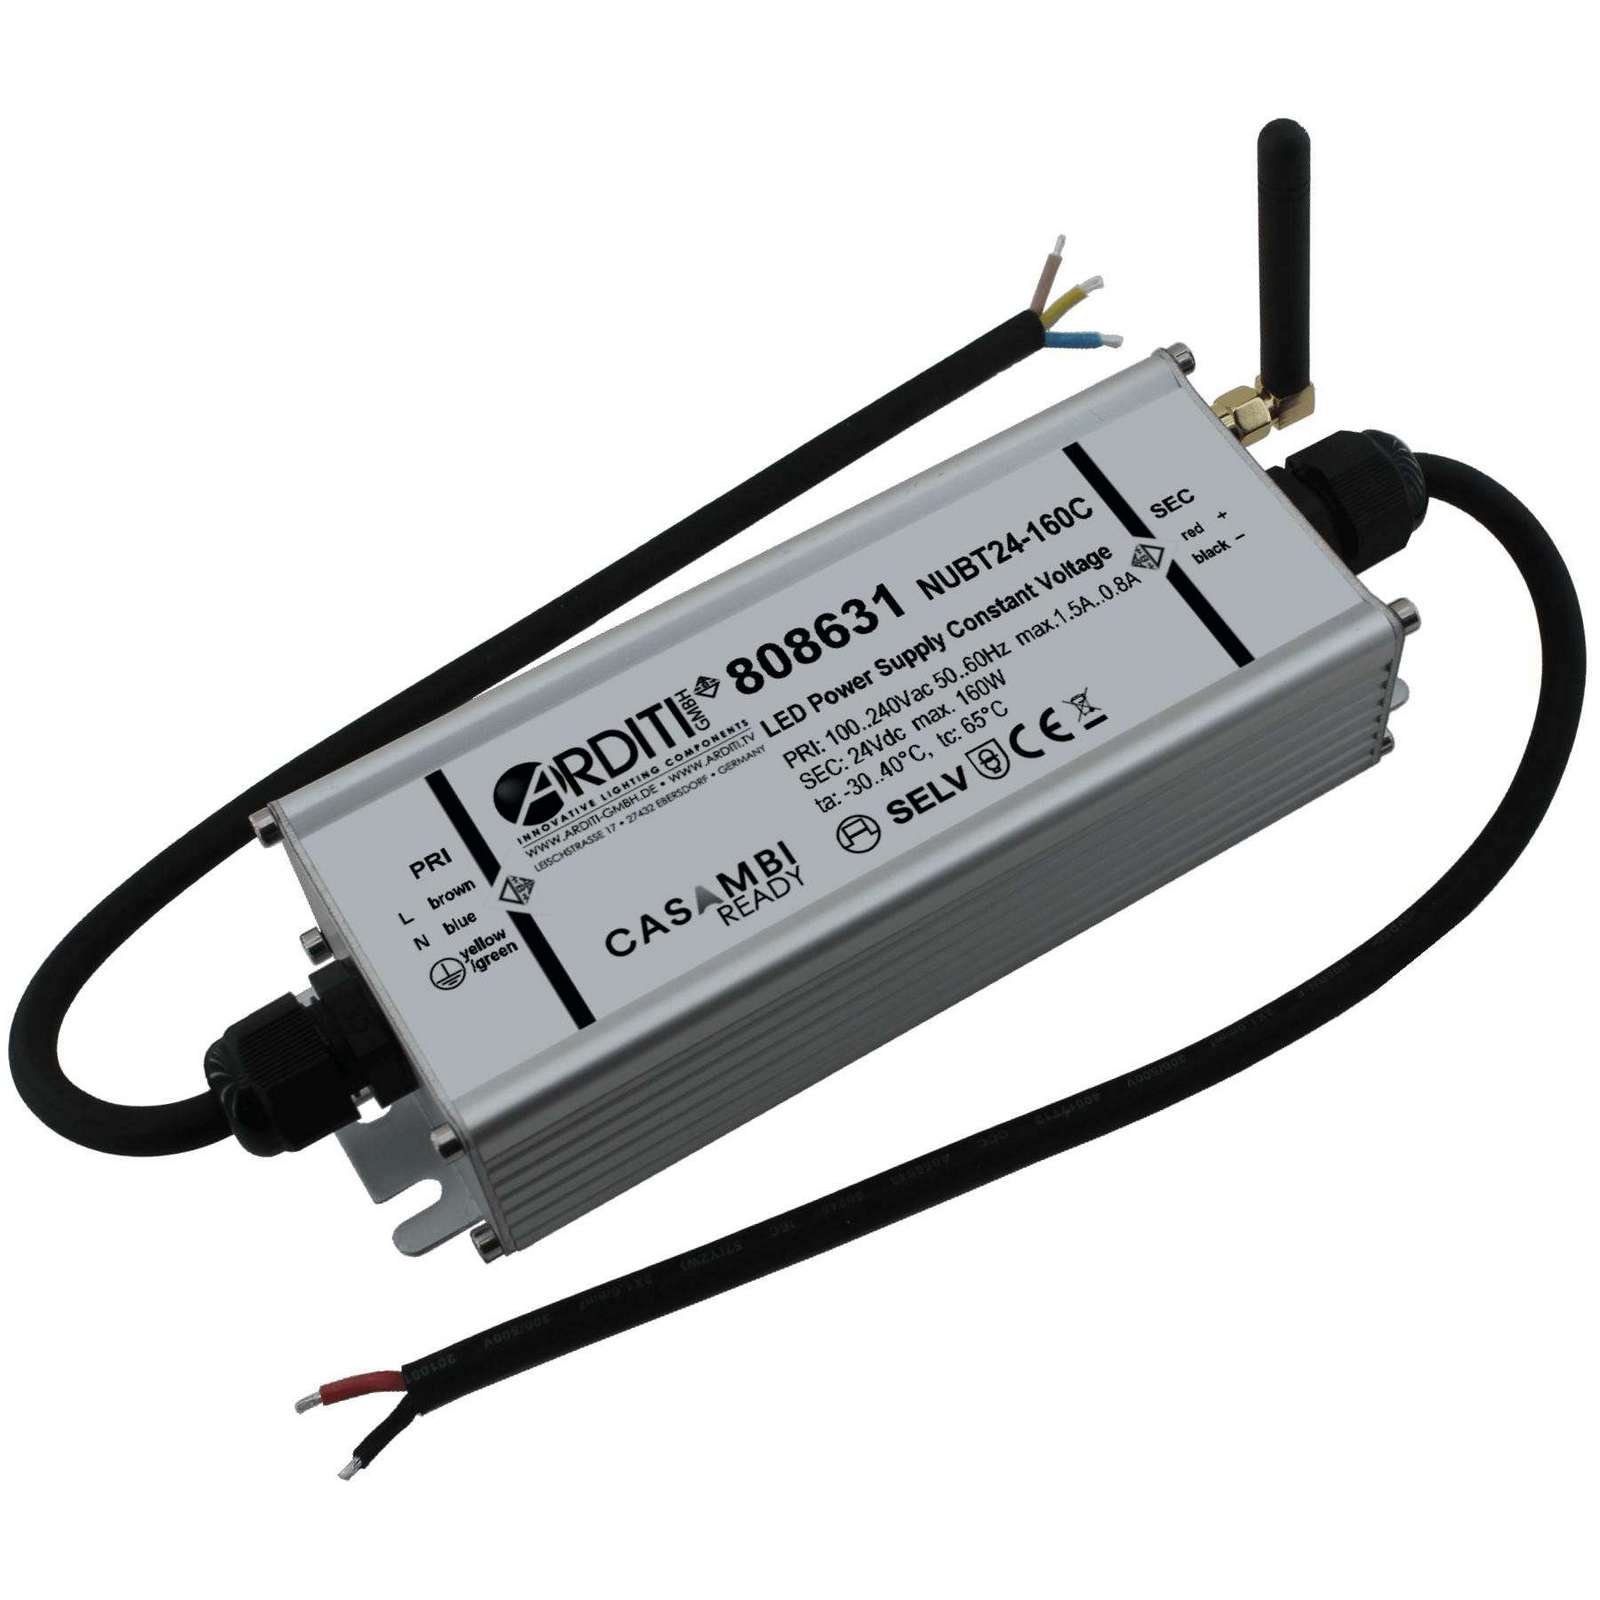 Constant Voltage LED Power Supply With Casambi Dimming (24V / 160W)